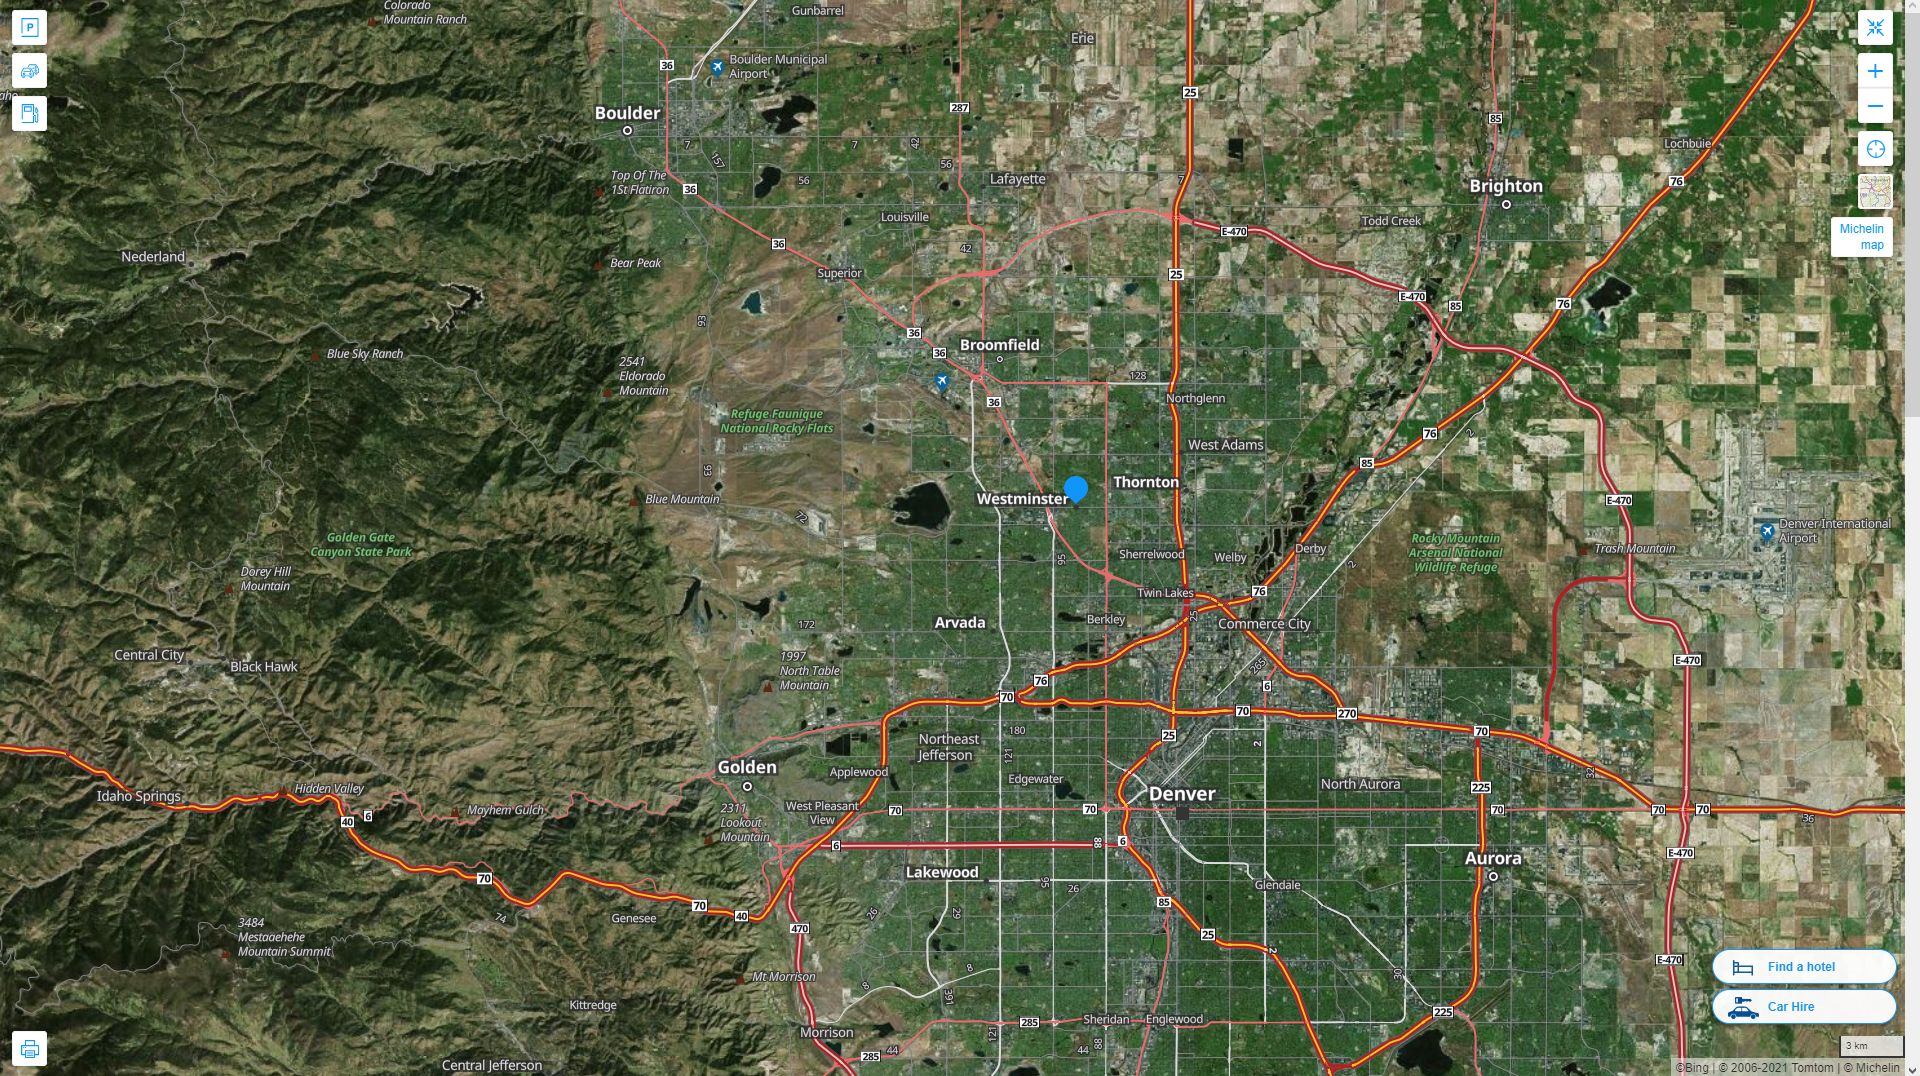 Westminster Colorado Highway and Road Map with Satellite View